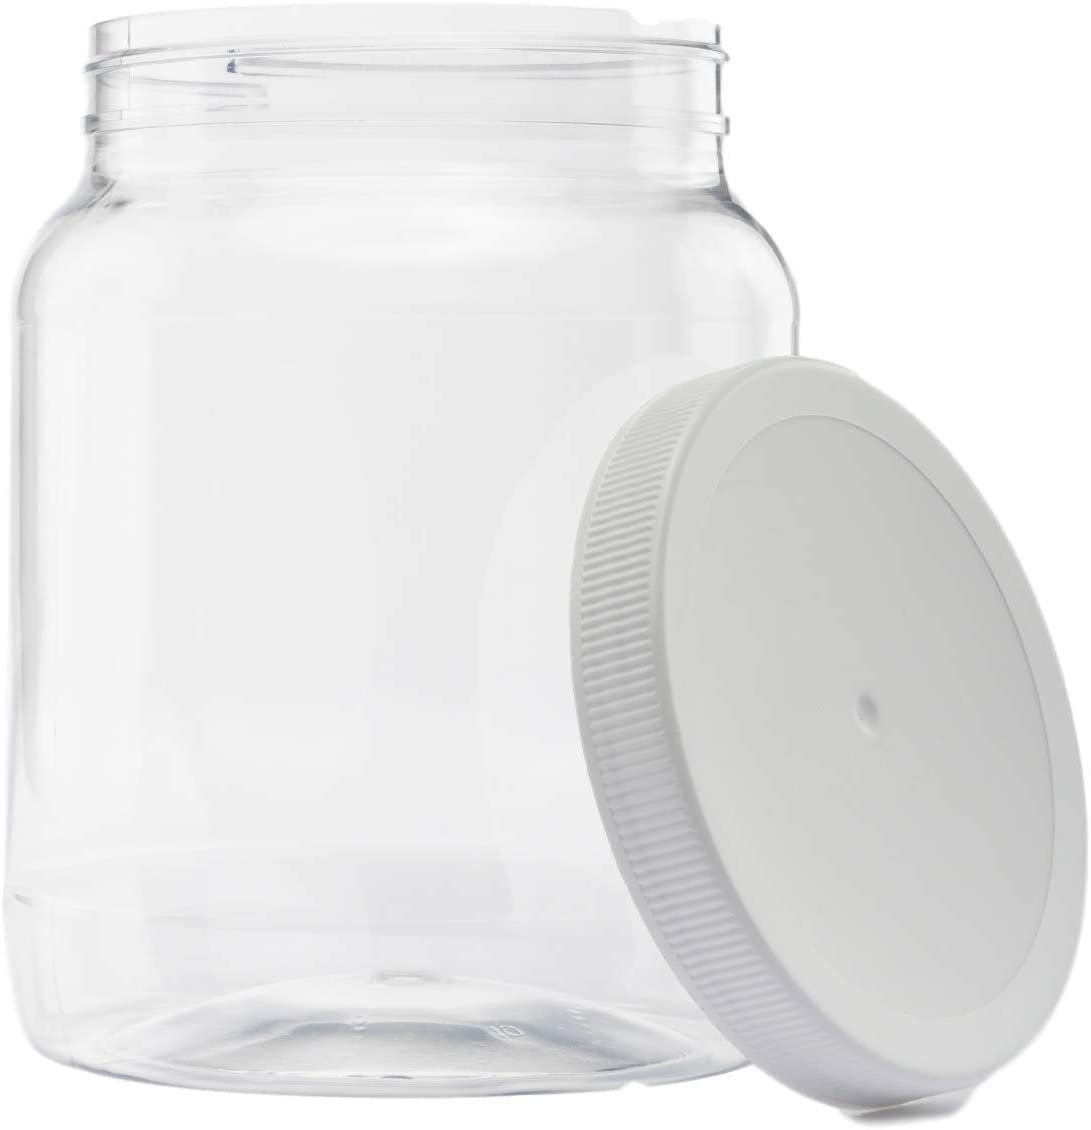 HFS(R) 2 Pack 1 Gallon Extra Large Glass Jar Wide Mouth with Plastic Lid